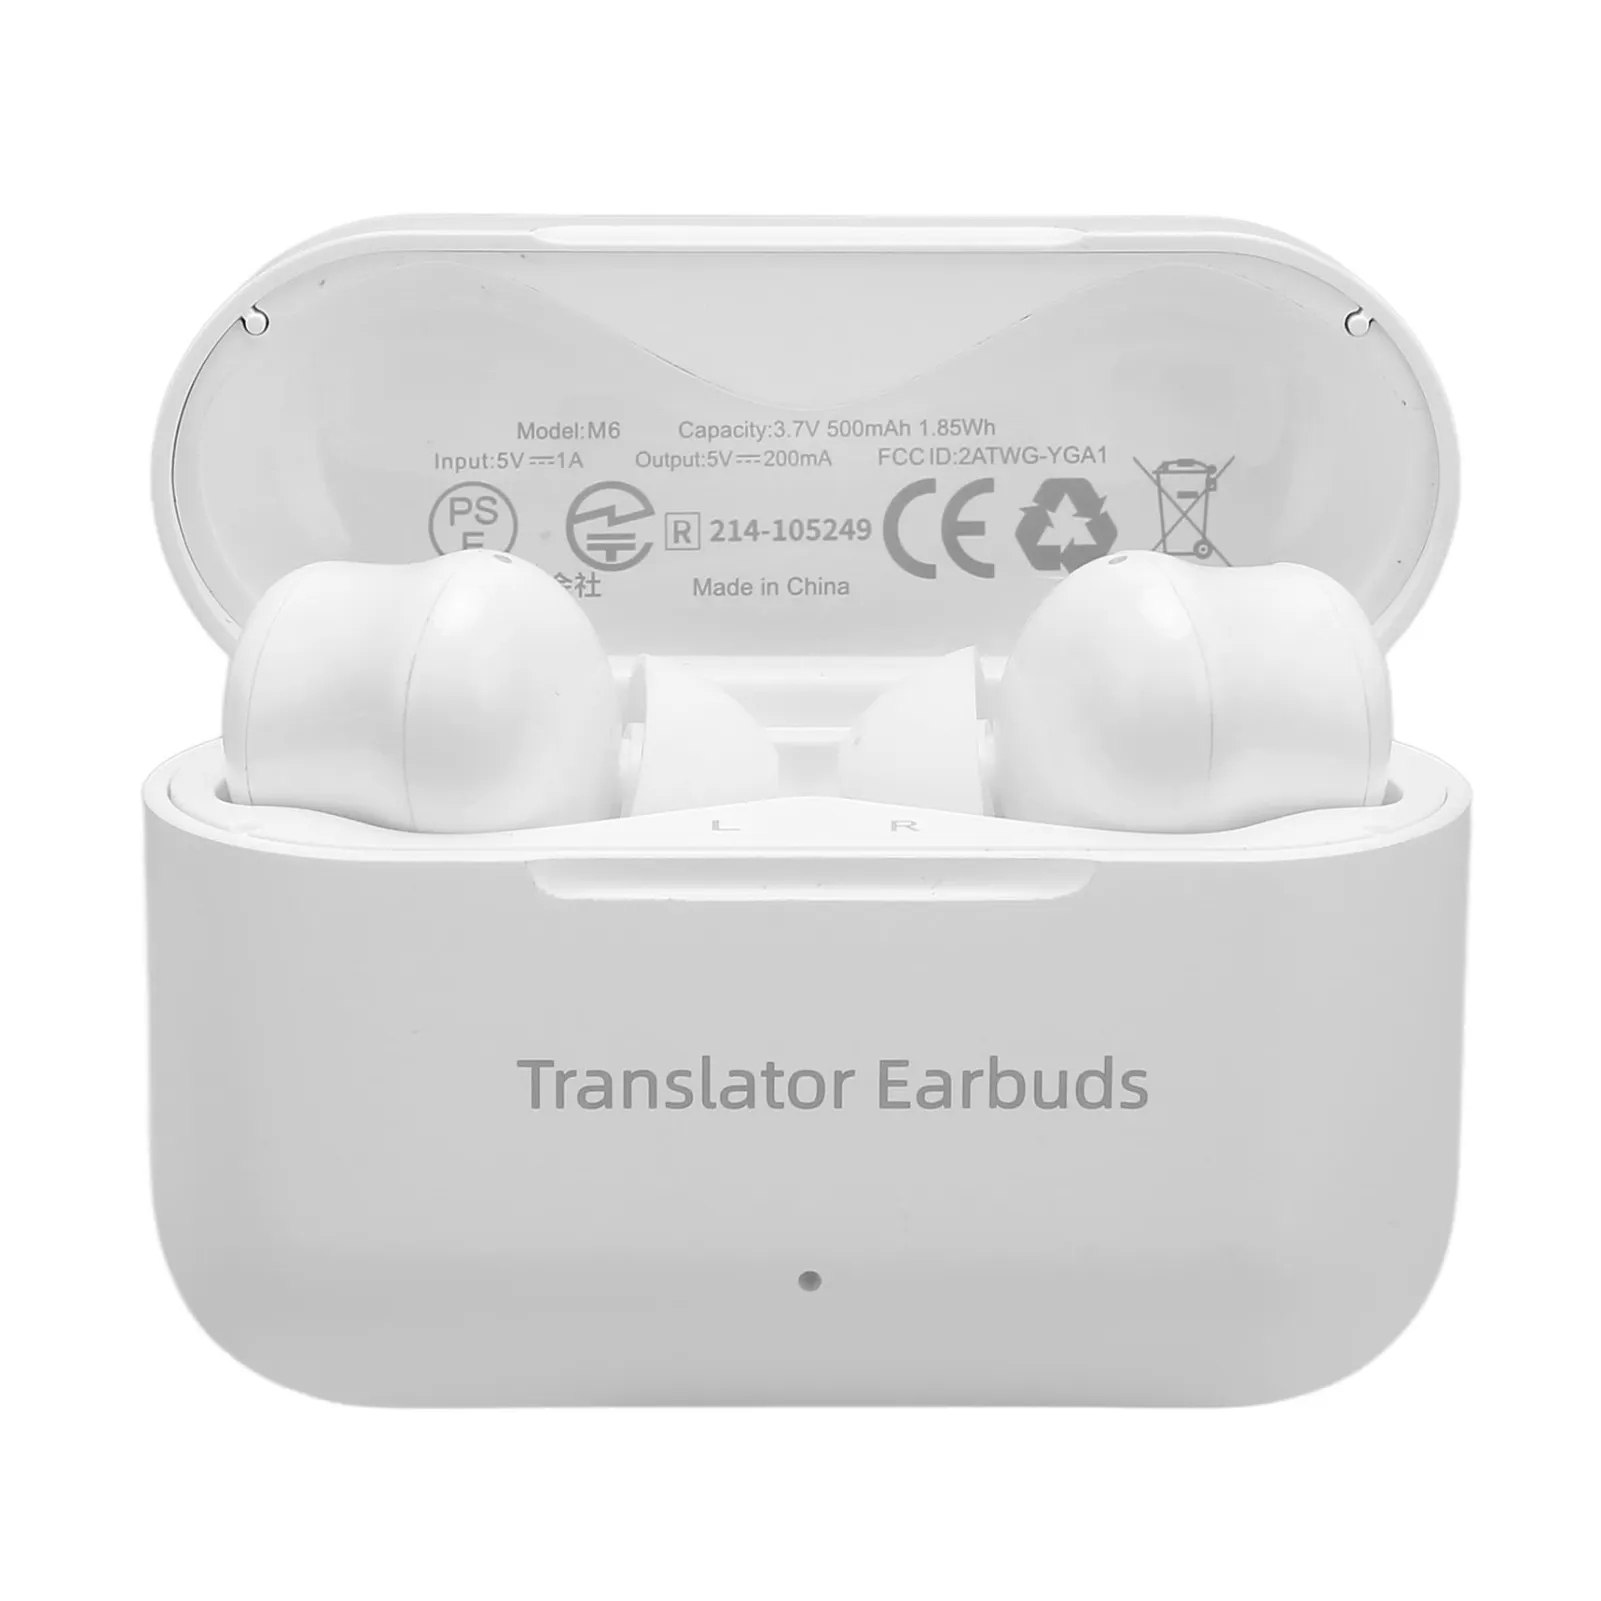 M3 M6 smart voice bluetooth wireless translate auriculares traductor 127 Language translation idiomas device earbuds Earphone